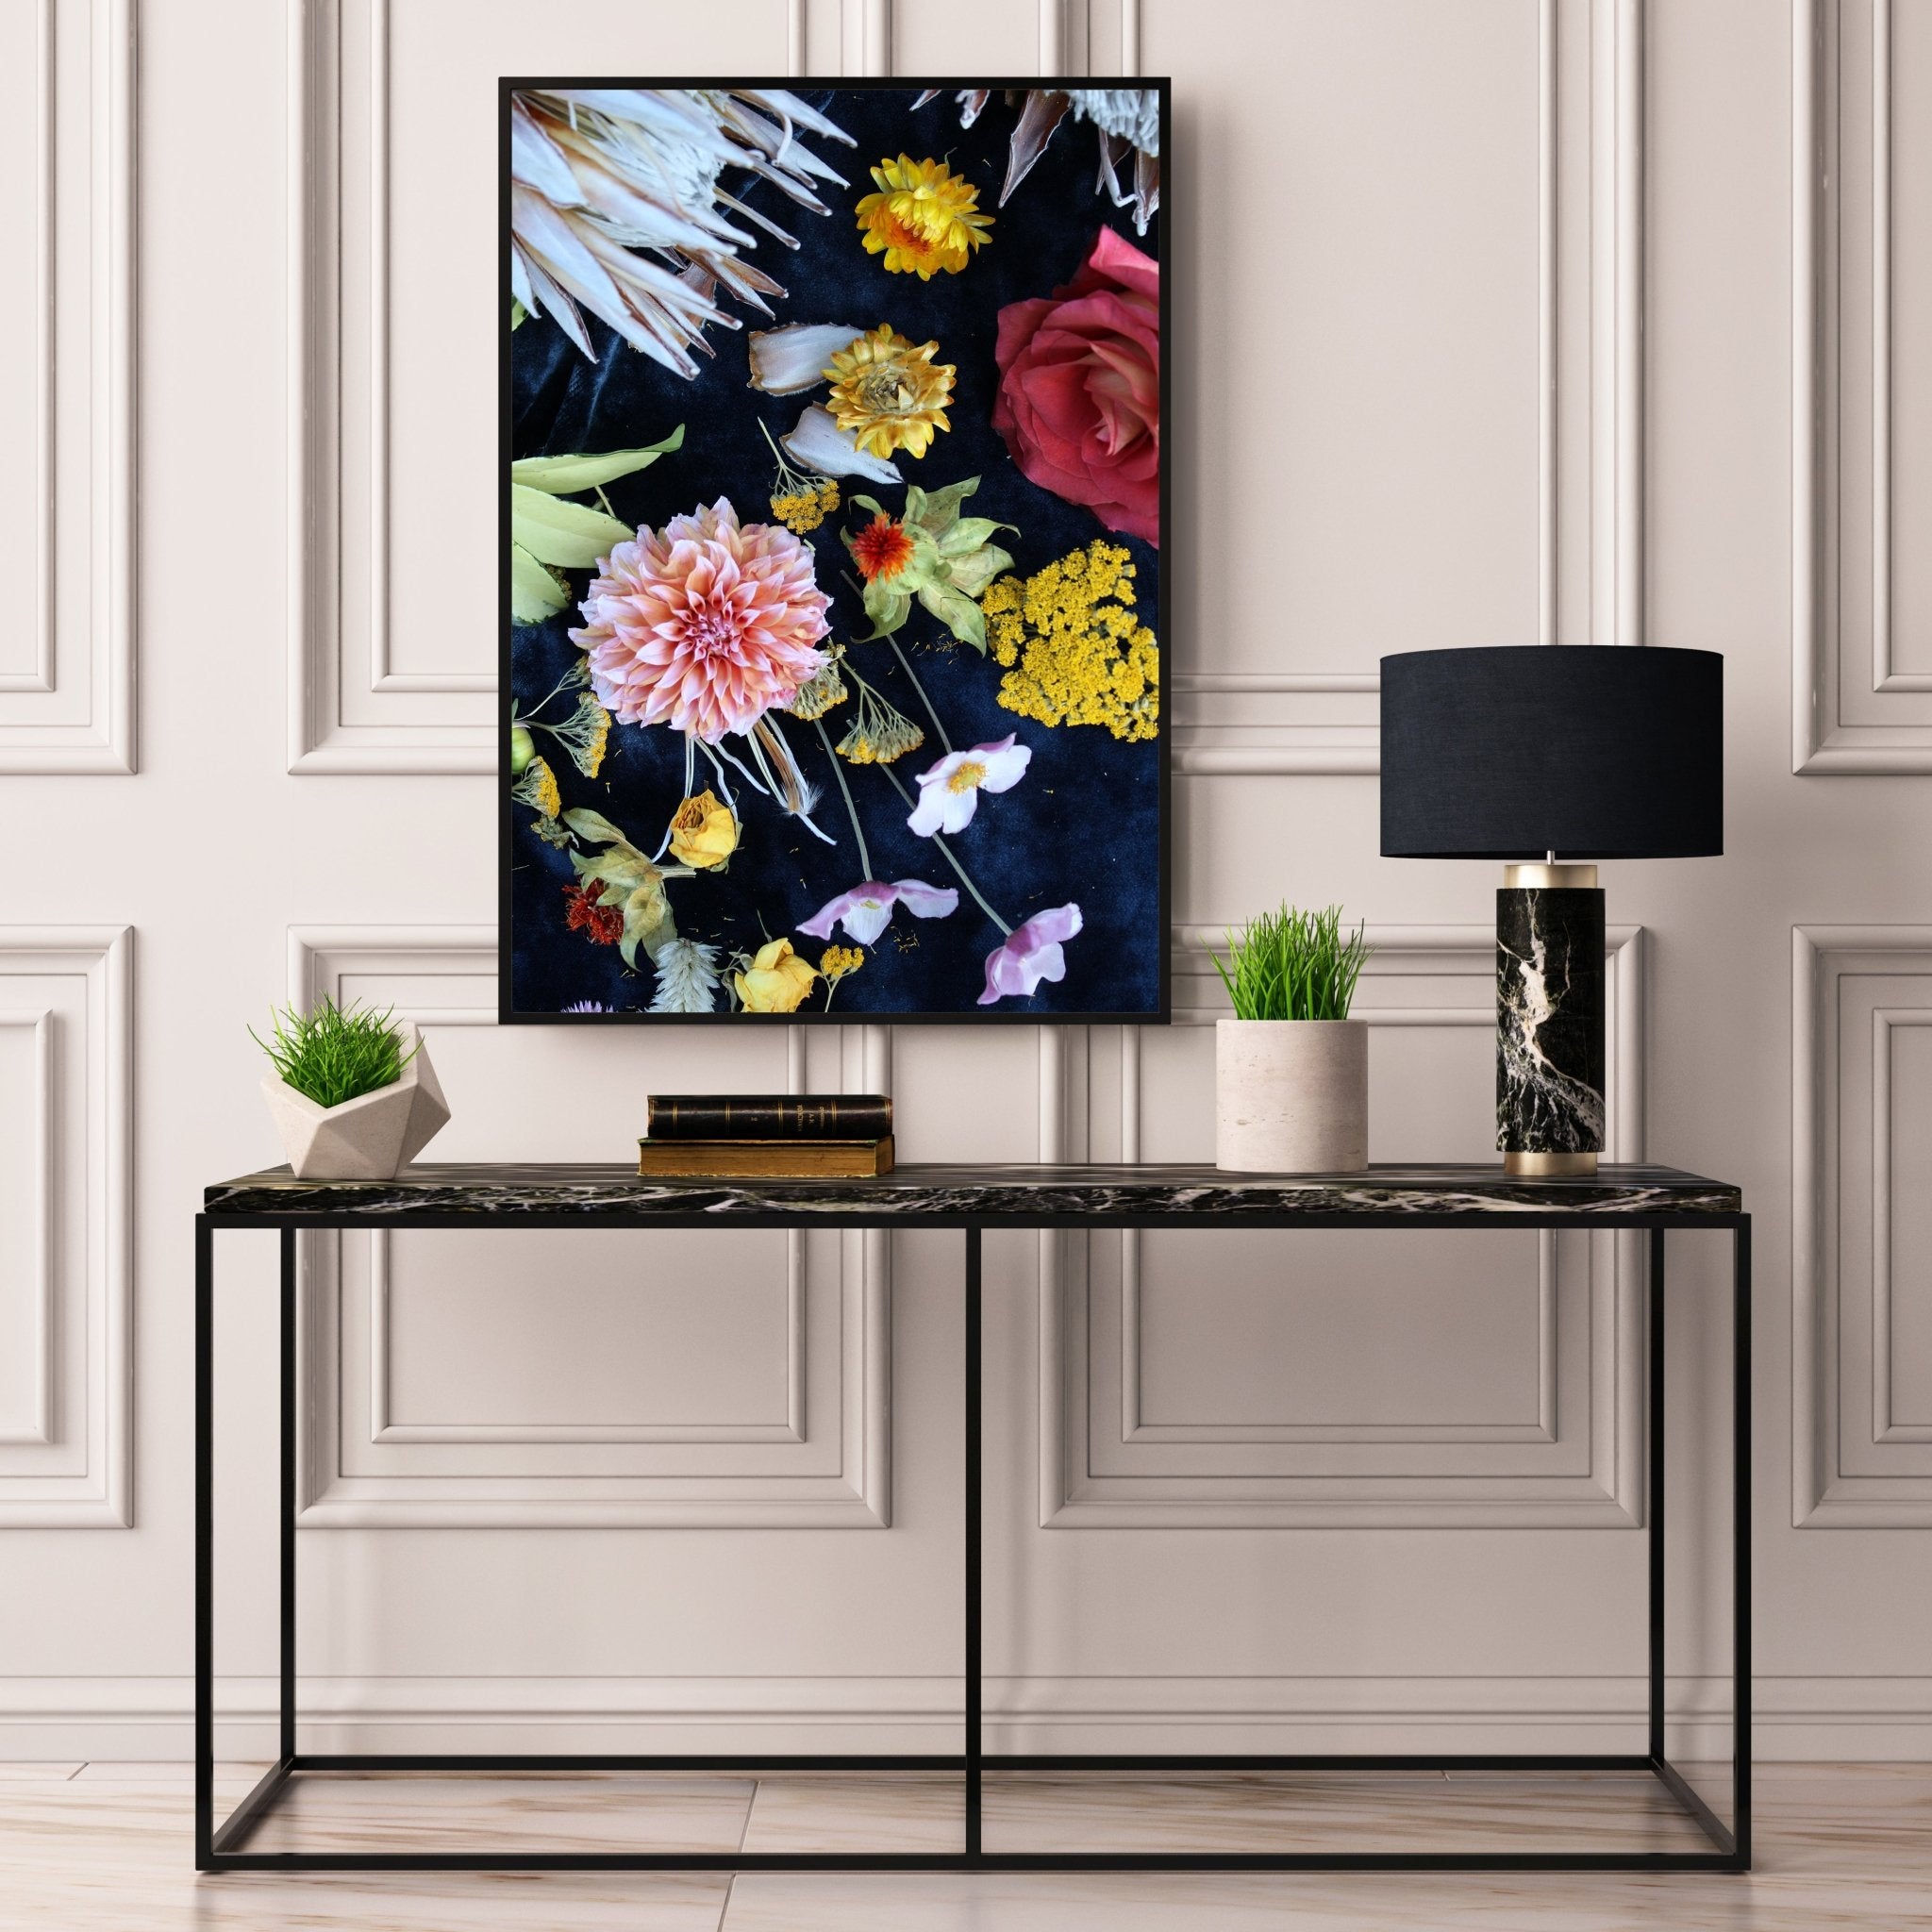 Midnight Flowers - D'Luxe Prints